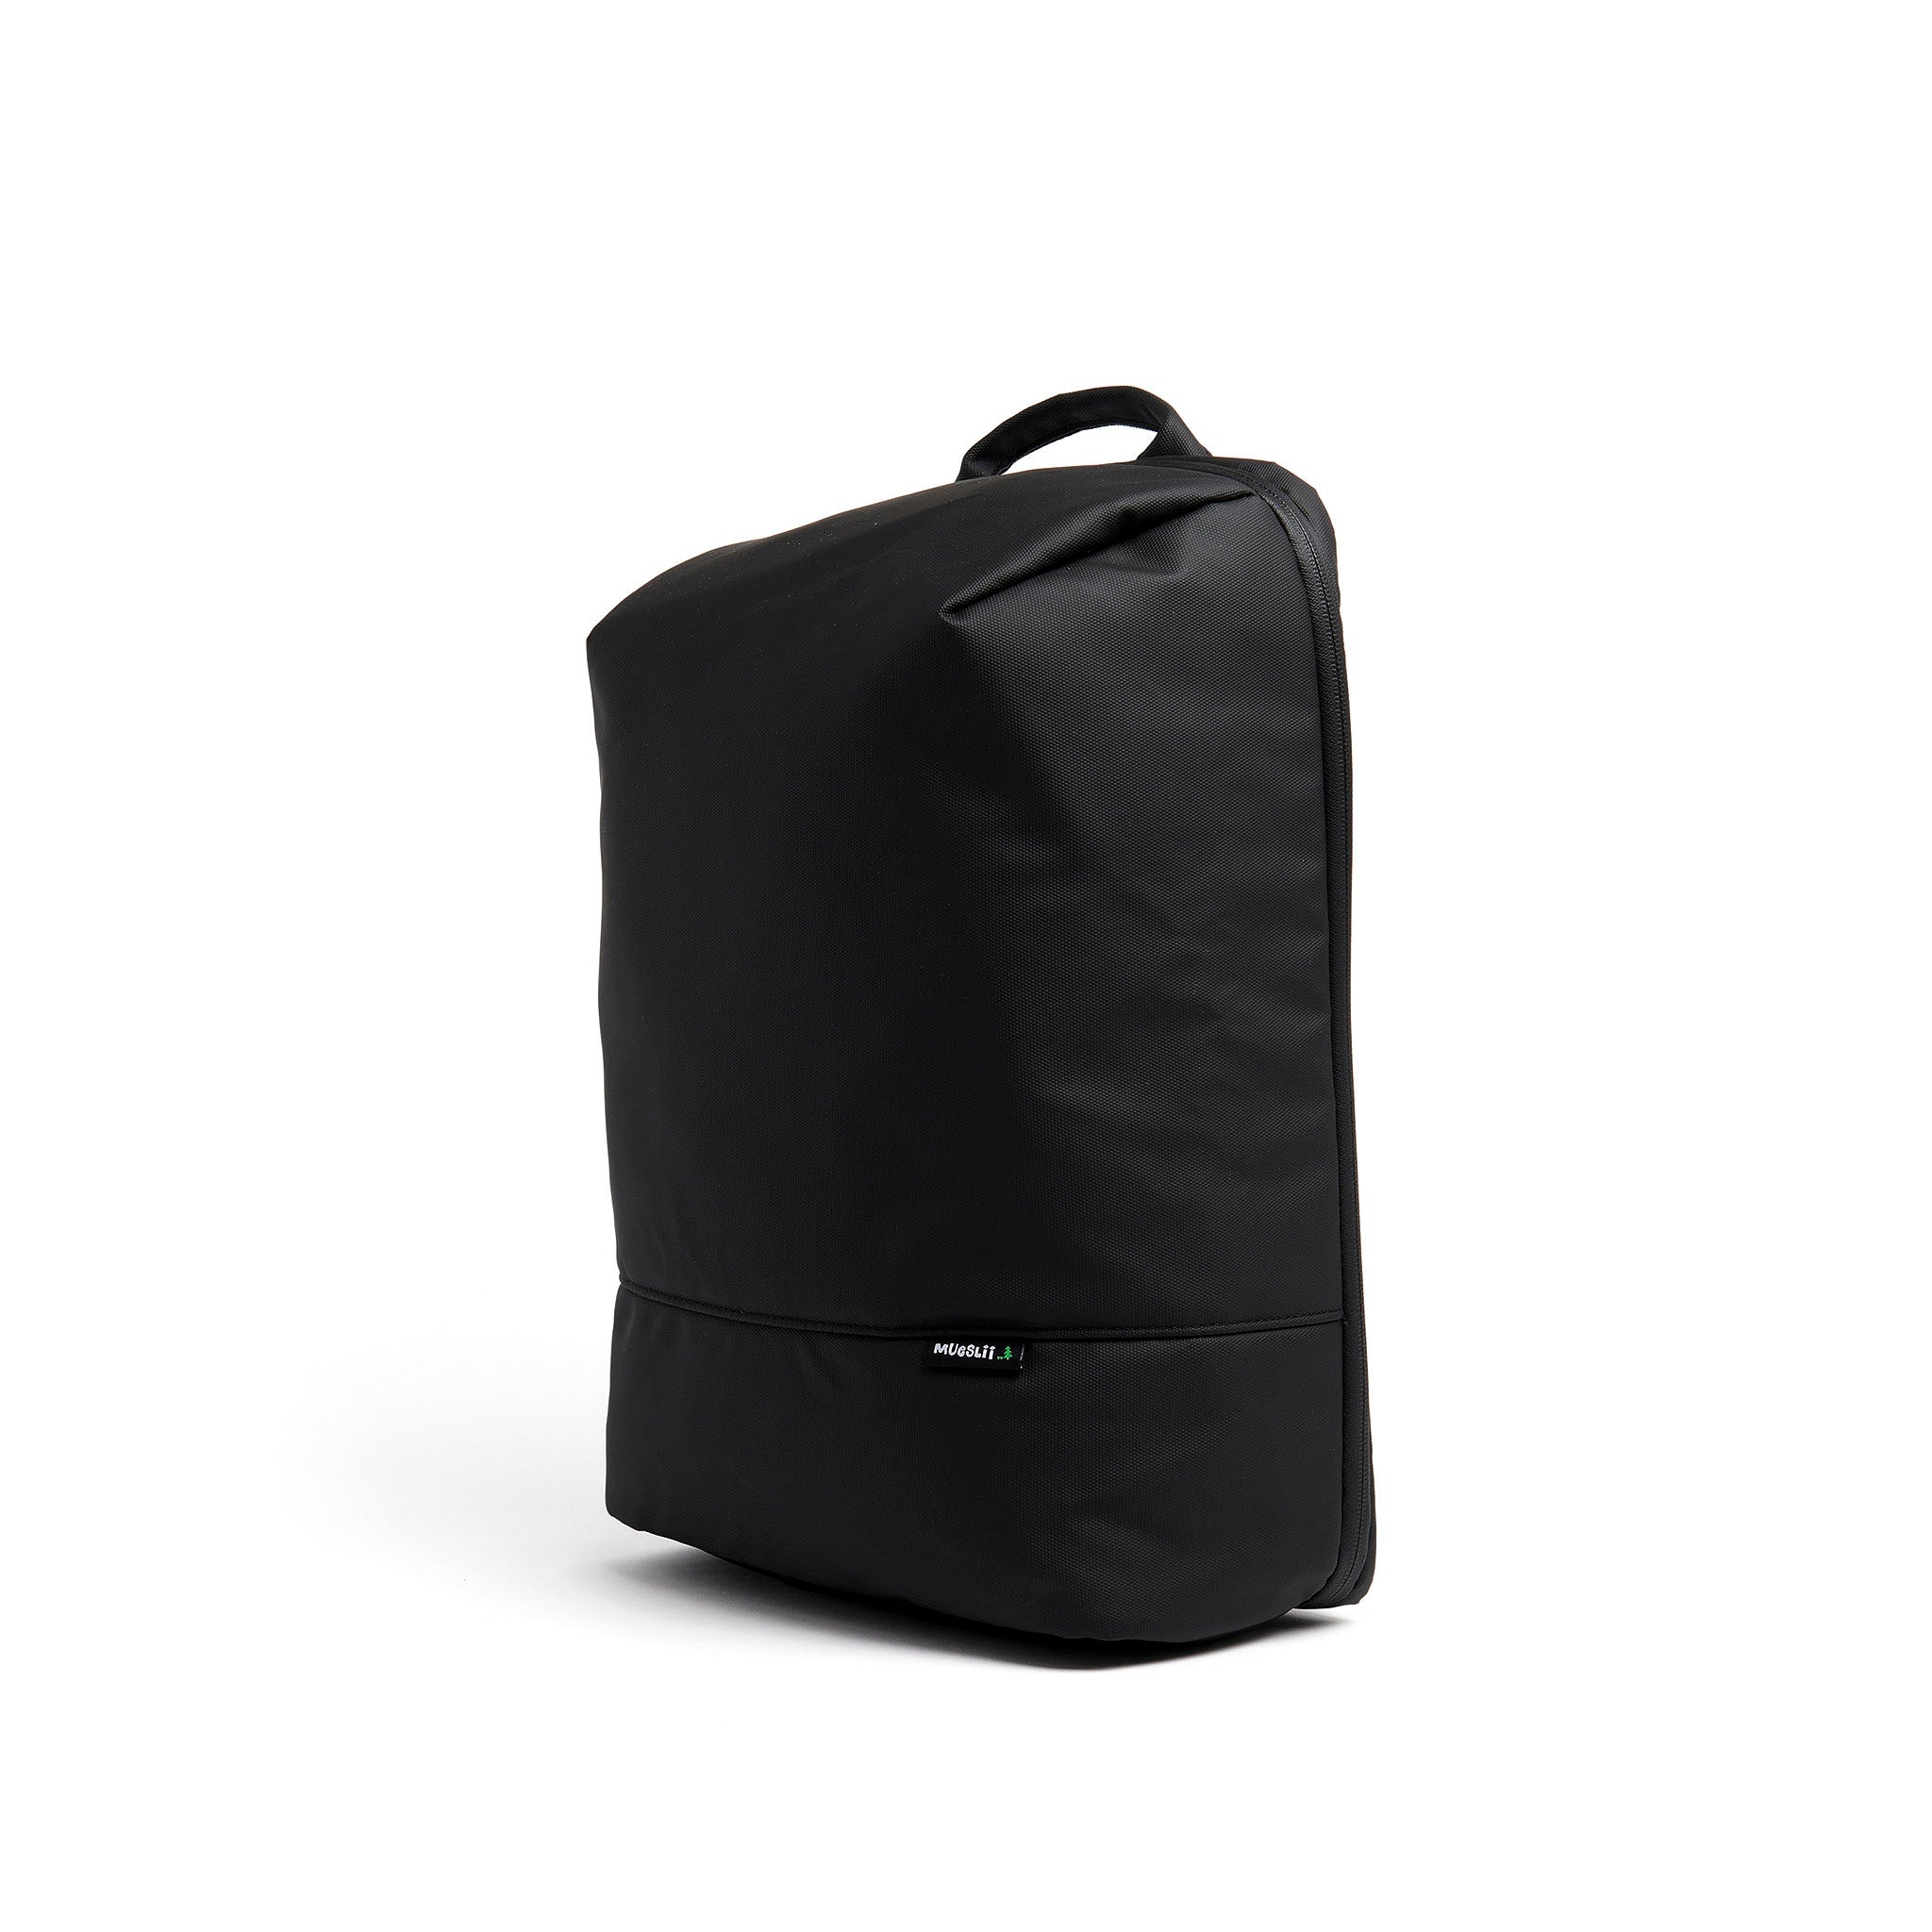 Mueslii travel backpack, made of PU coated waterproof nylon, with a laptop compartment, color coal black, side view.